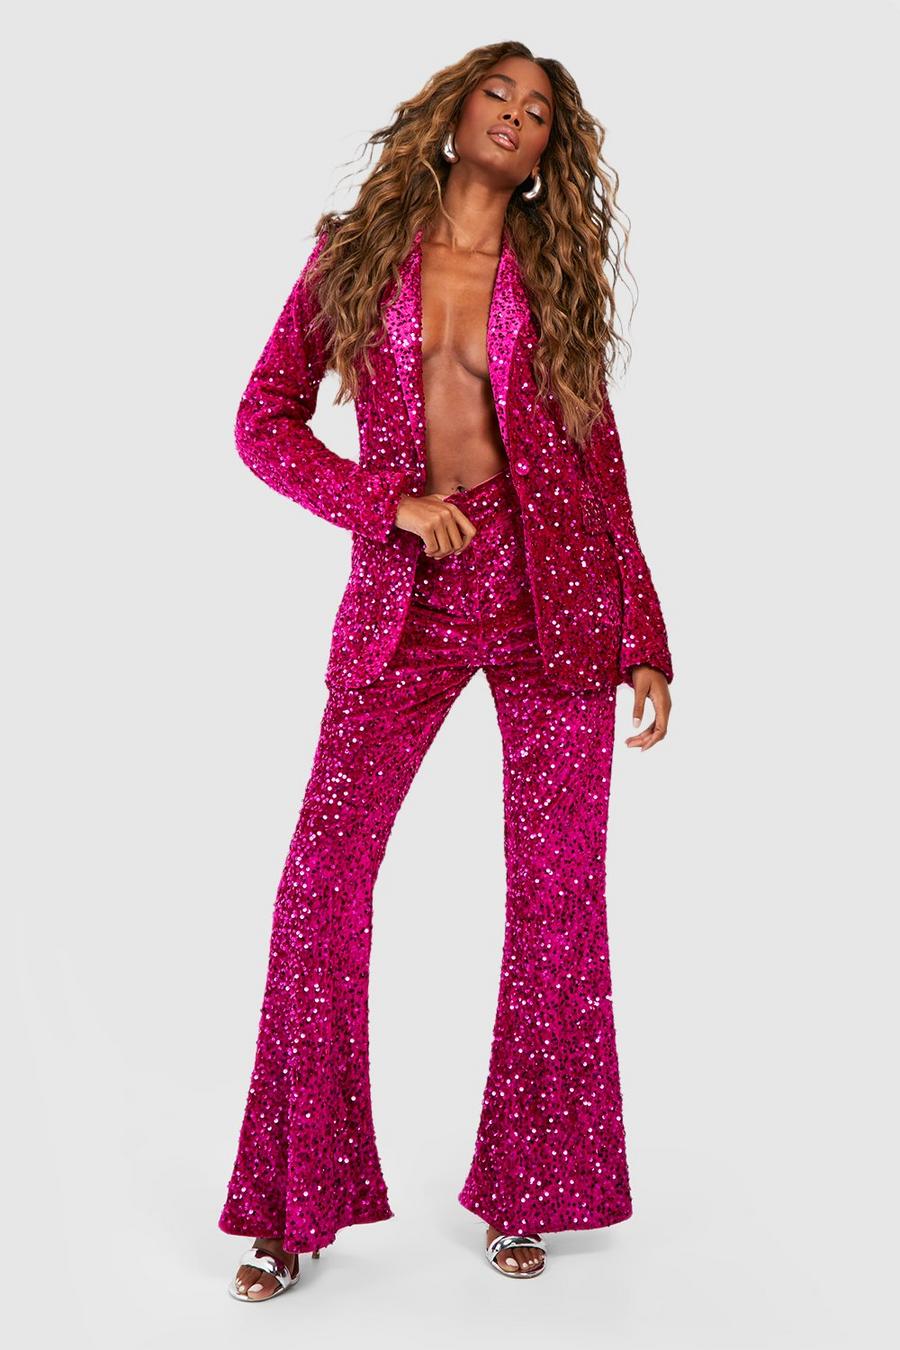 Hot pink Velvet Sequin Fit & Flare Tailored Pants